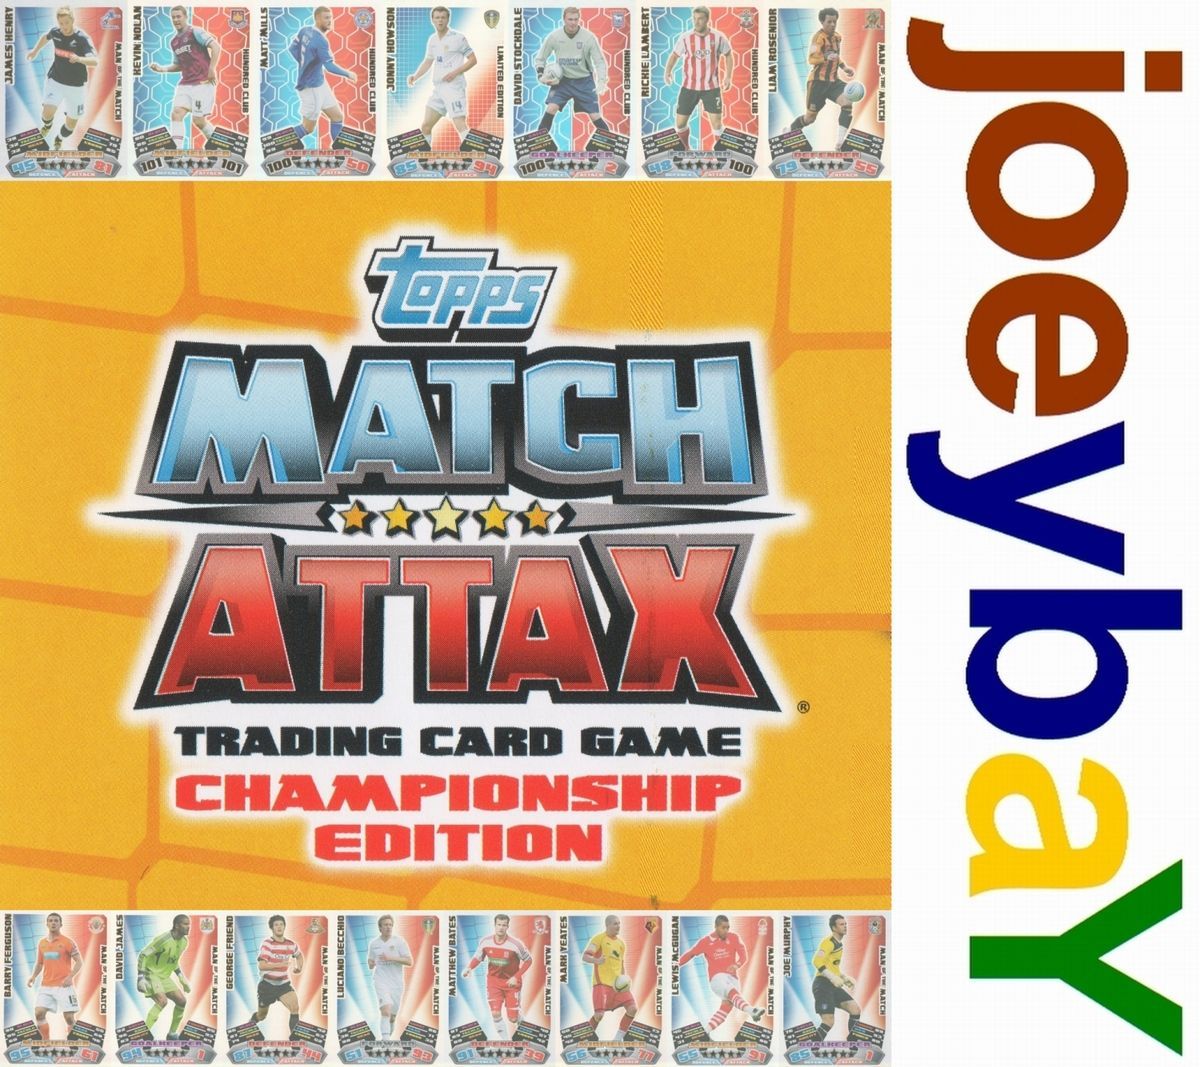 Choose 11 12 Championship Hundred Club Man of The Match Attax or